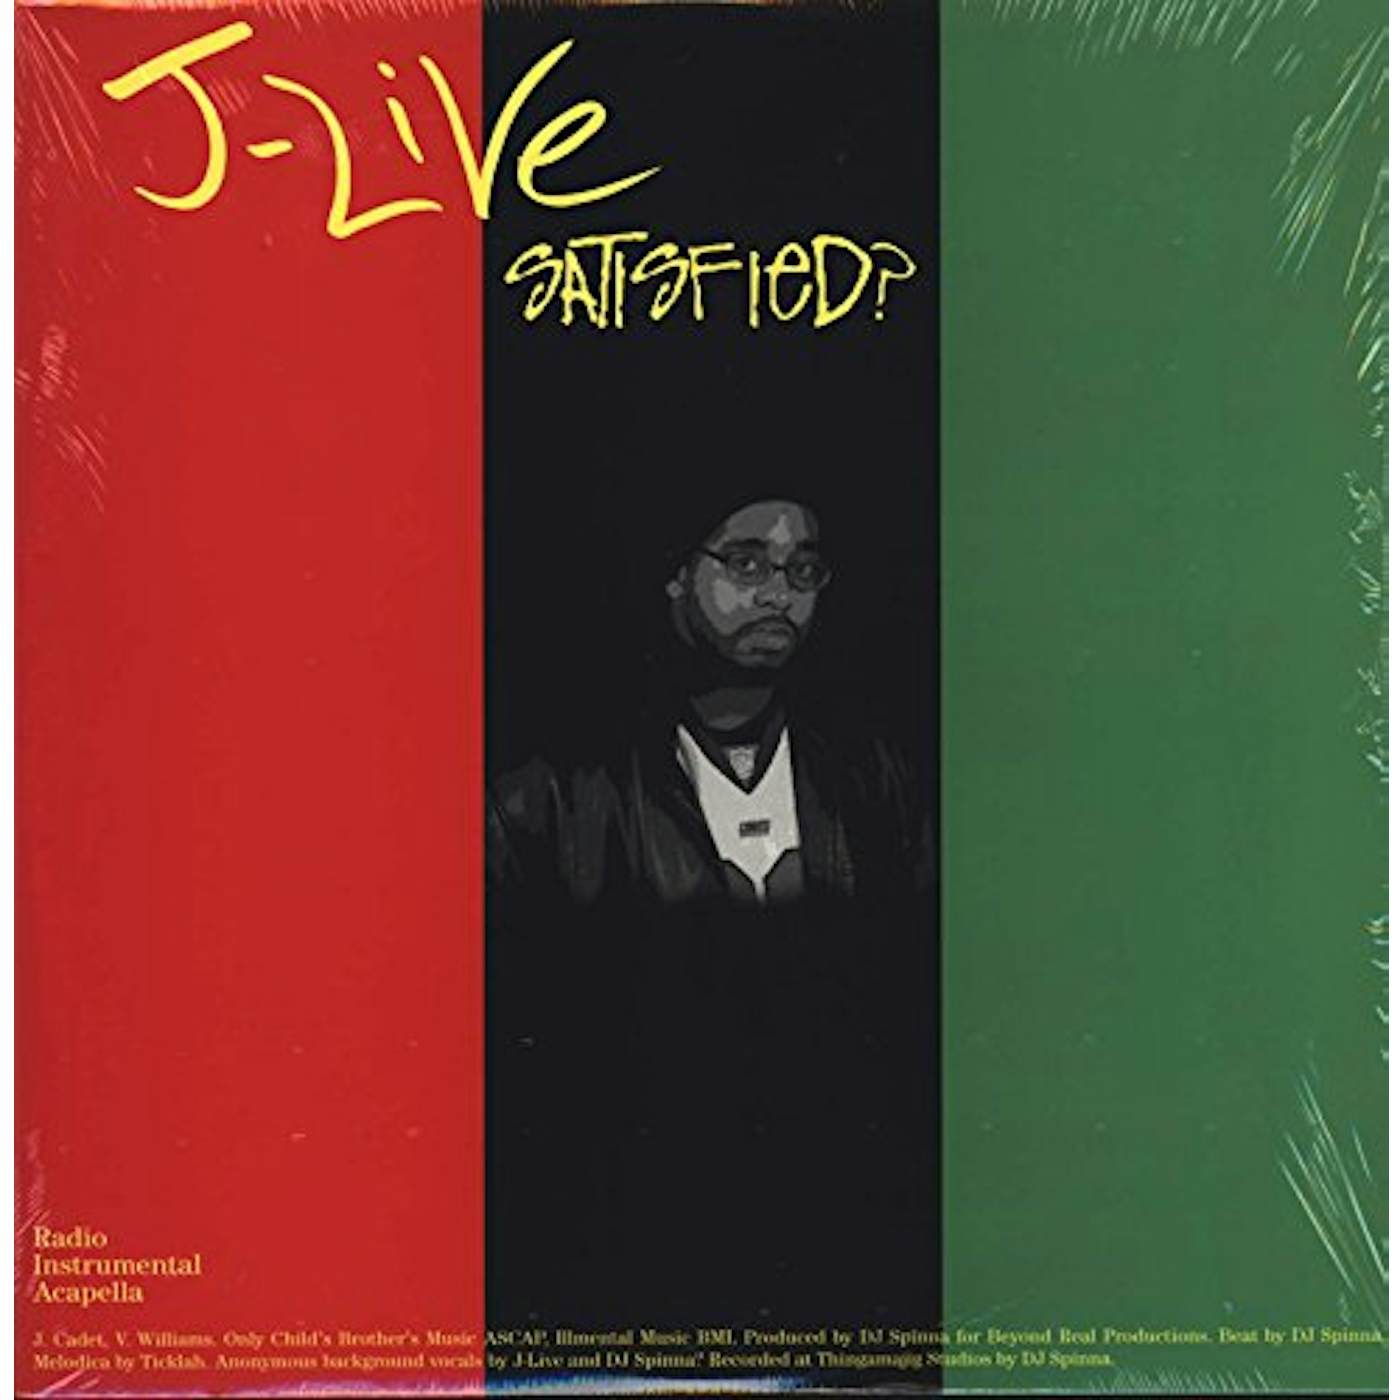 J-Live SATISFIED / A CHANGED LIFE Vinyl Record